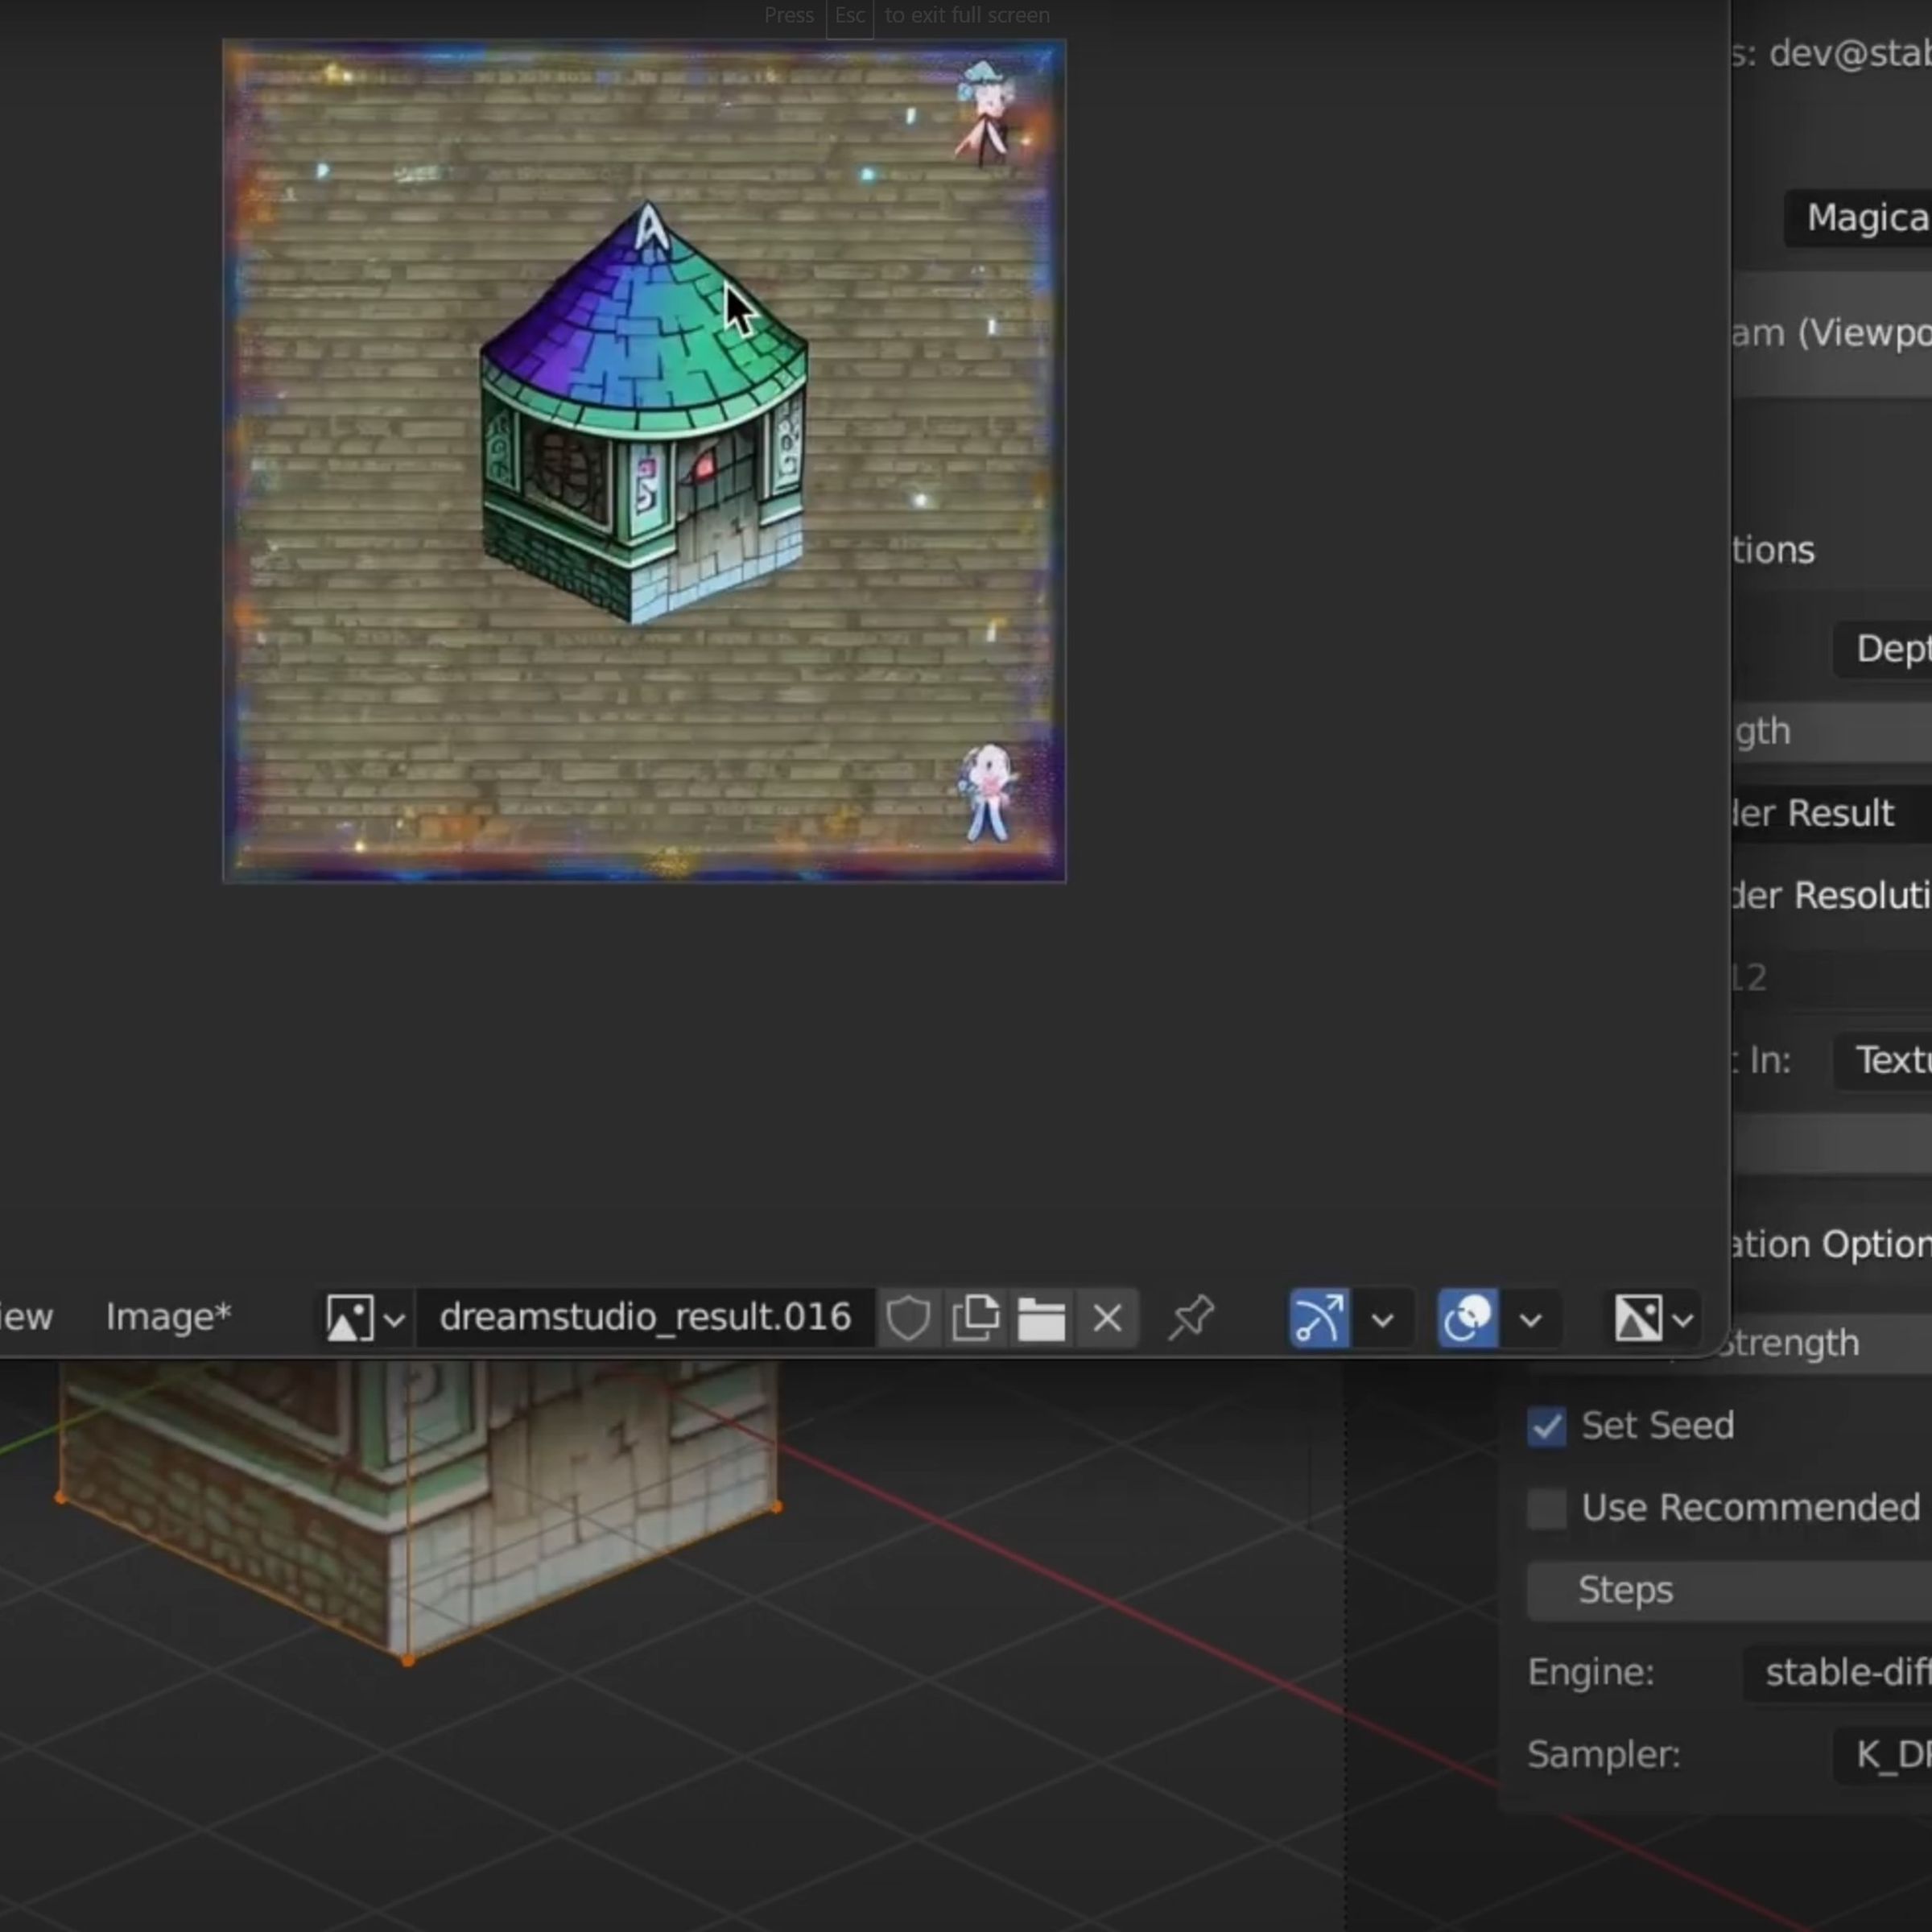 A screenshot of a 3D model of a house in Blender being transformed into a 2D image render using the Stability for Blender plugin.